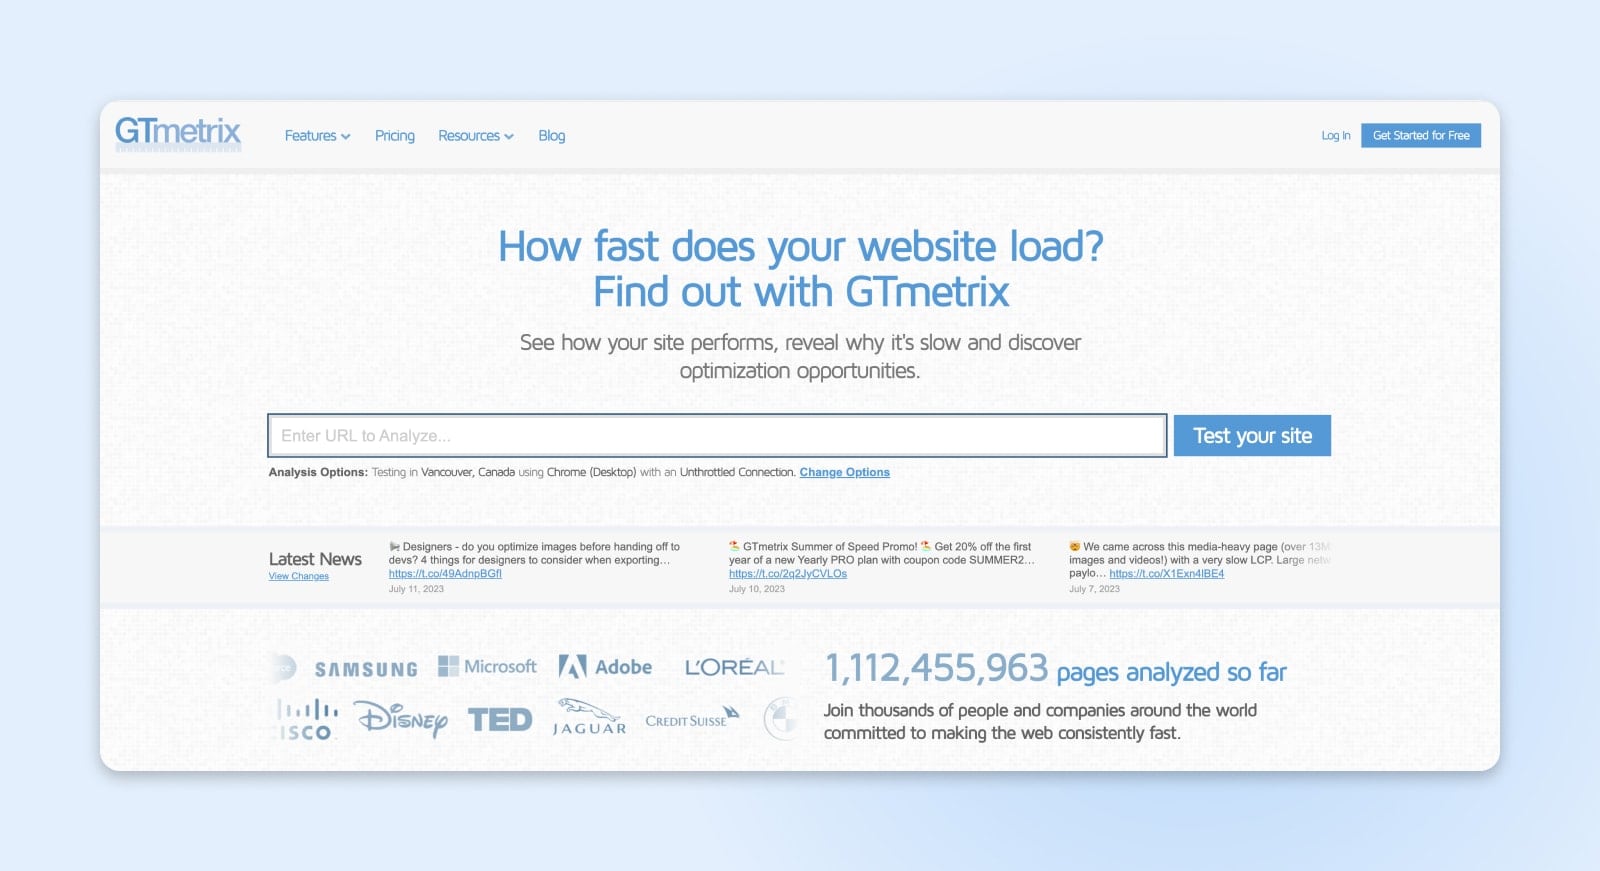 GTmetrix – Complete Guide to Turn Your WPO Green - Blog SEO of